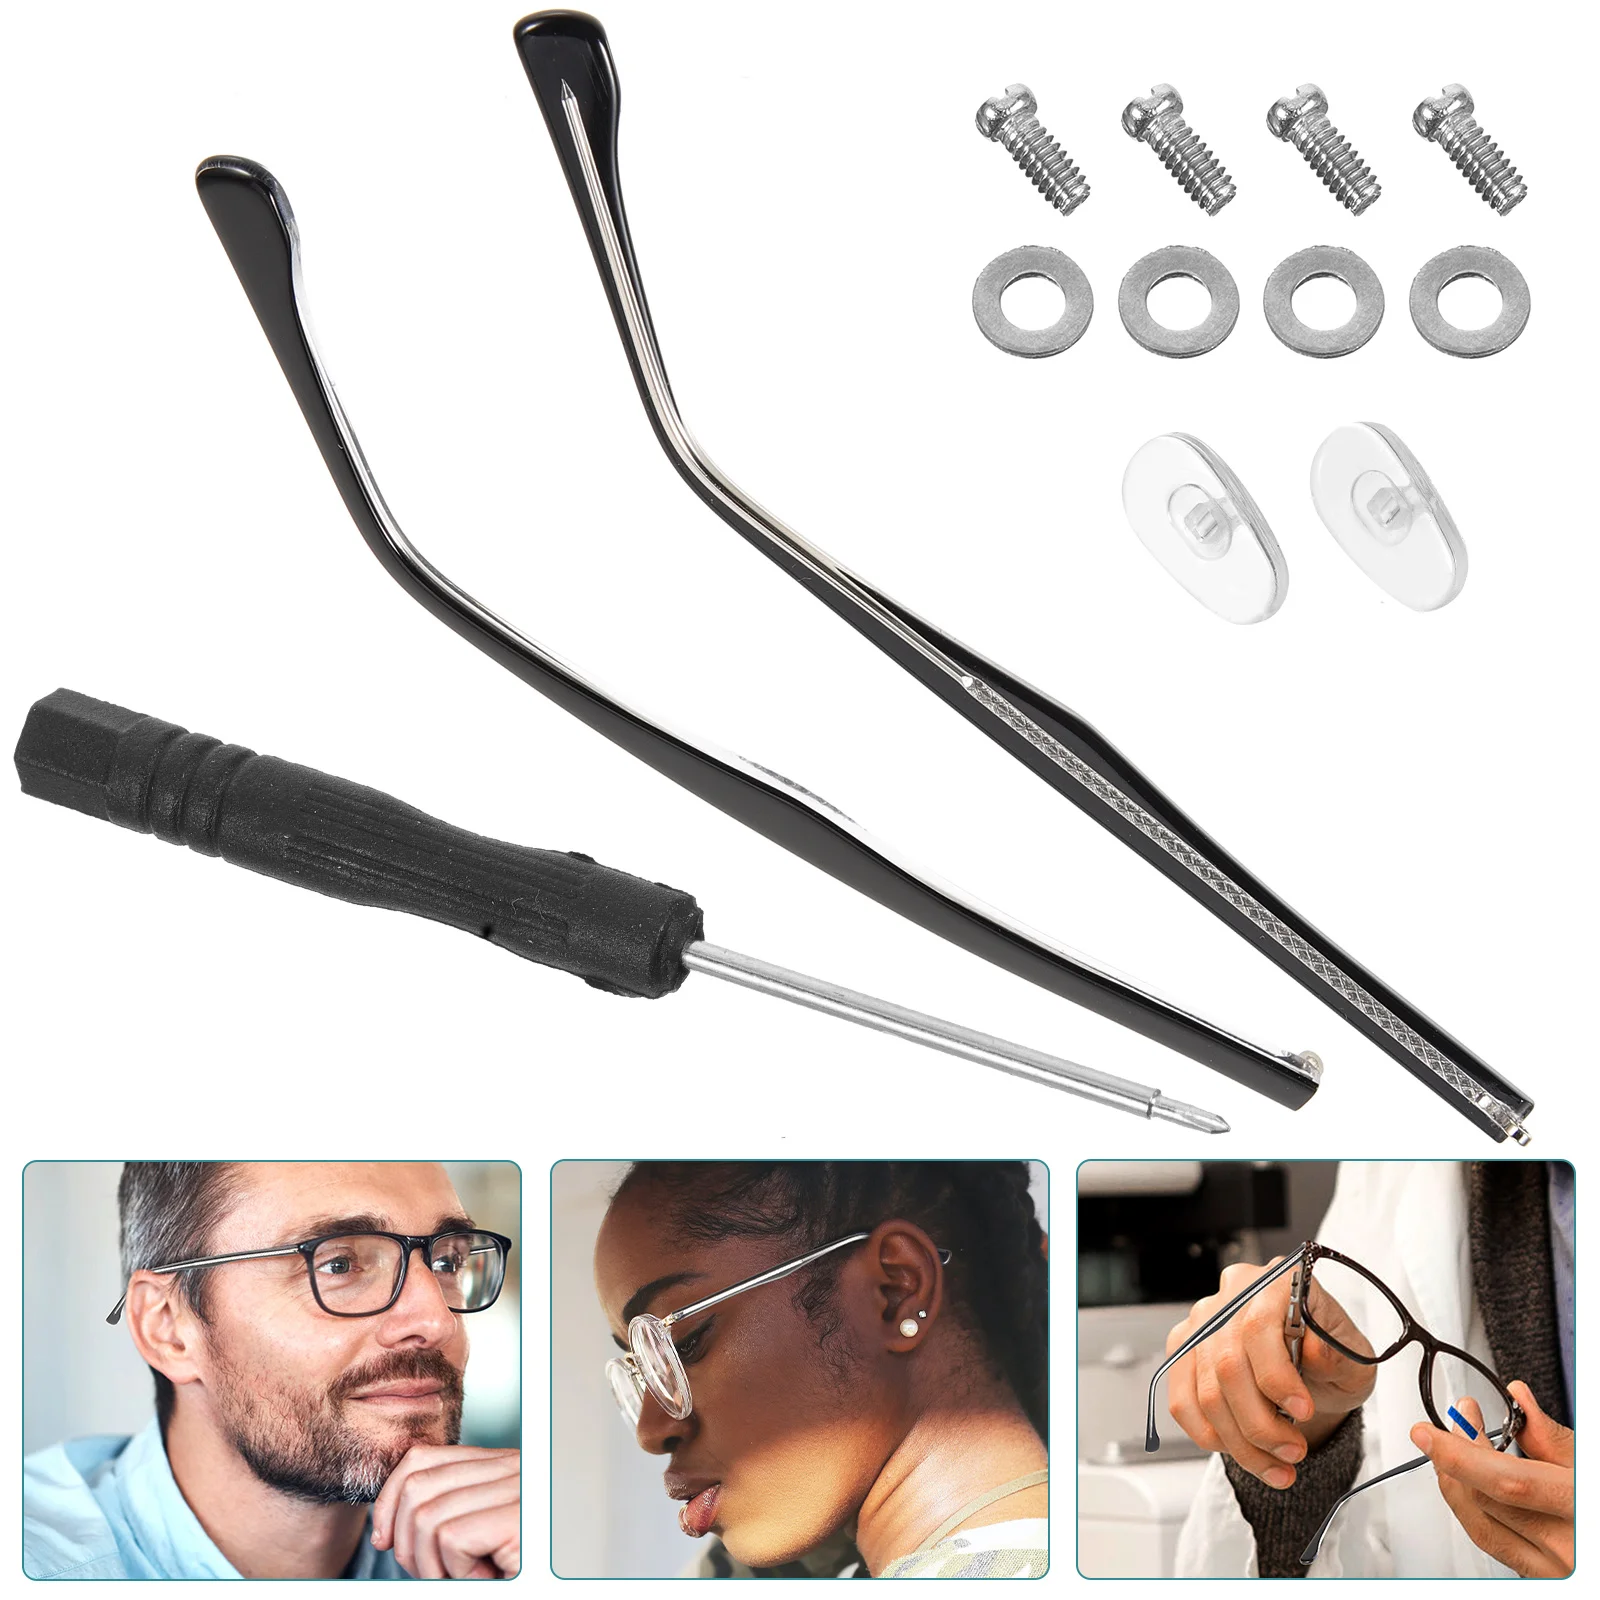 

Spectacle Legs Replacement Glasses Arm Eyeglasses Temples Metal Arms Accessories Replacements Parts